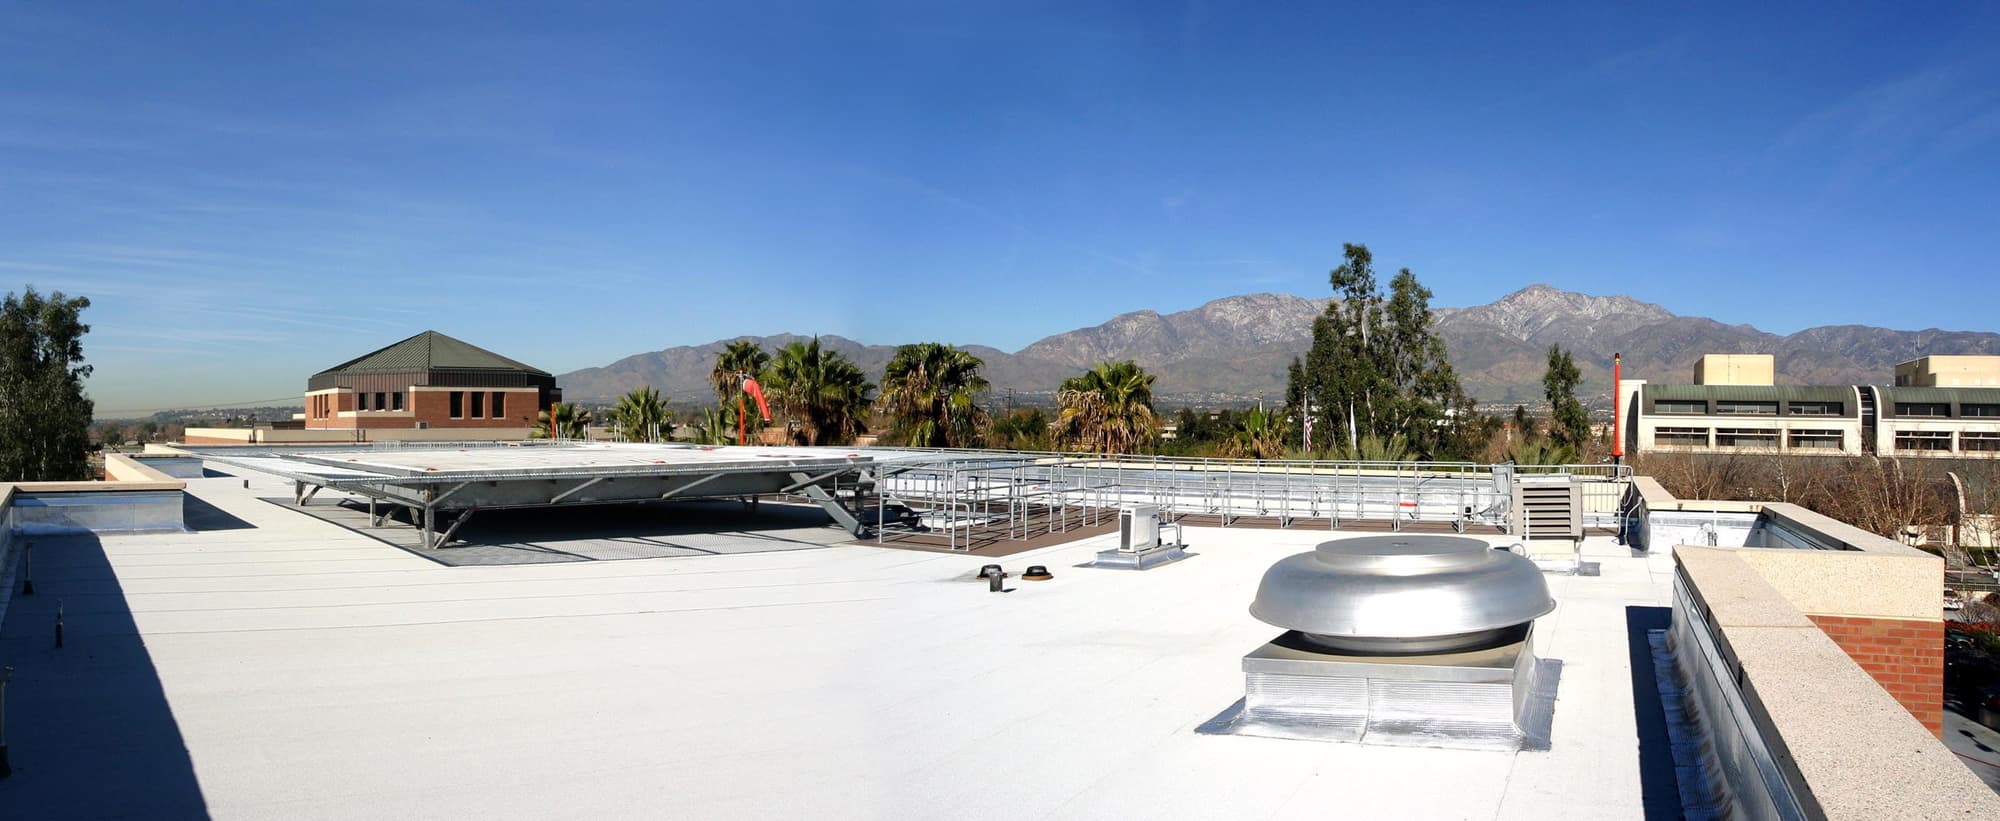 Commercial Roofing News